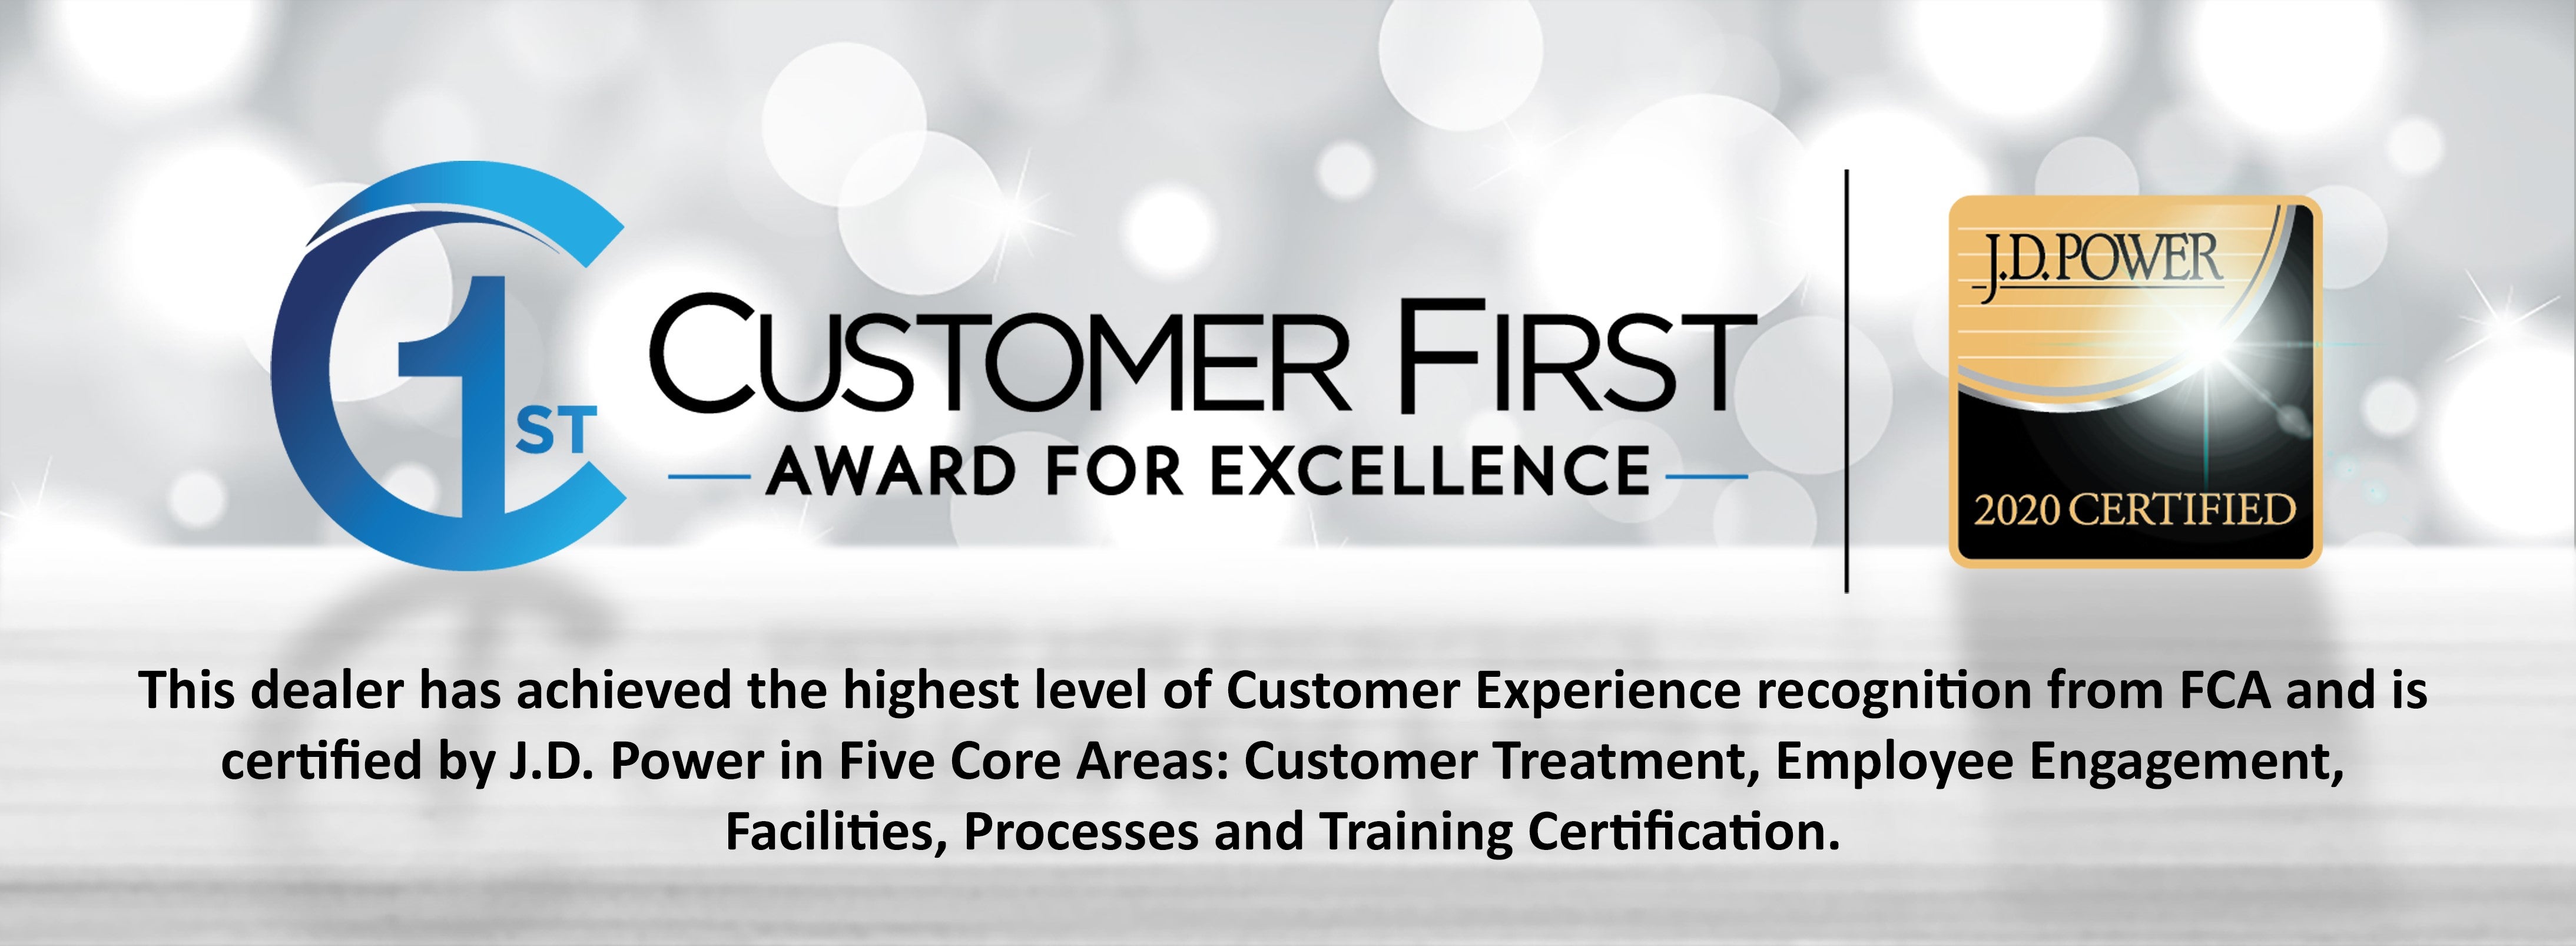 Customer First Award for Excellence for 2019 at Deacon's Chrysler Dodge Jeep Ram in Mayfield Village, OH